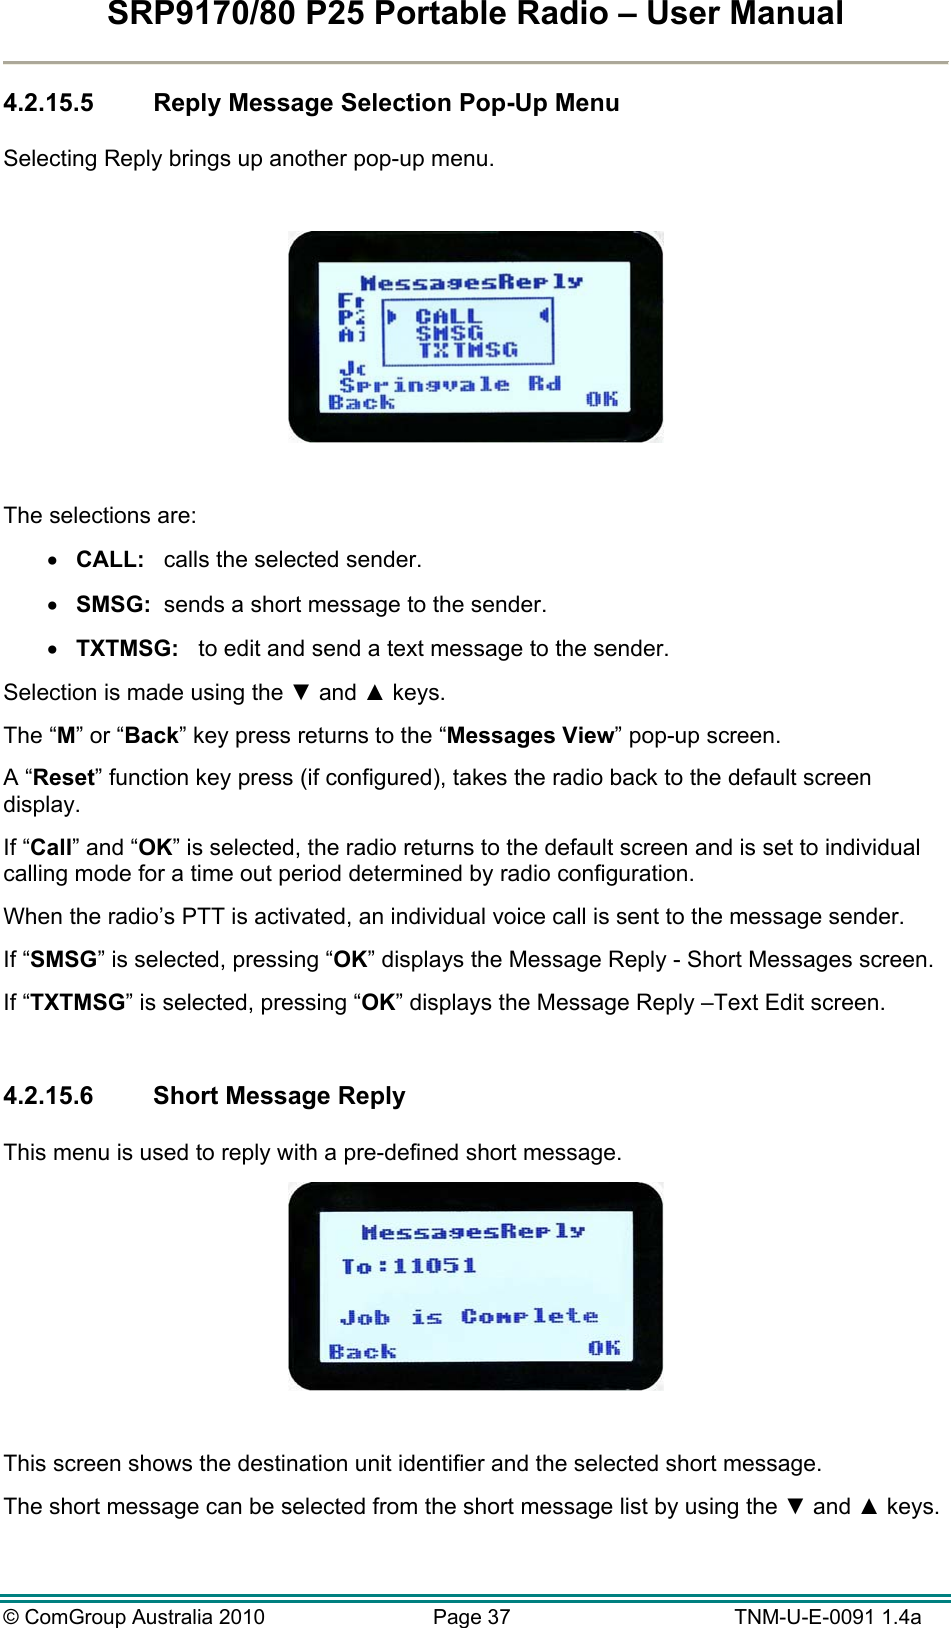 SRP9170/80 P25 Portable Radio – User Manual  © ComGroup Australia 2010  Page 37   TNM-U-E-0091 1.4a 4.2.15.5 Reply Message Selection Pop-Up Menu  Selecting Reply brings up another pop-up menu.    The selections are:  CALL:   calls the selected sender.  SMSG:  sends a short message to the sender.  TXTMSG:   to edit and send a text message to the sender. Selection is made using the ▼ and ▲ keys. The “M” or “Back” key press returns to the “Messages View” pop-up screen. A “Reset” function key press (if configured), takes the radio back to the default screen display. If “Call” and “OK” is selected, the radio returns to the default screen and is set to individual calling mode for a time out period determined by radio configuration. When the radio’s PTT is activated, an individual voice call is sent to the message sender. If “SMSG” is selected, pressing “OK” displays the Message Reply - Short Messages screen. If “TXTMSG” is selected, pressing “OK” displays the Message Reply –Text Edit screen.  4.2.15.6  Short Message Reply  This menu is used to reply with a pre-defined short message.   This screen shows the destination unit identifier and the selected short message. The short message can be selected from the short message list by using the ▼ and ▲ keys. 